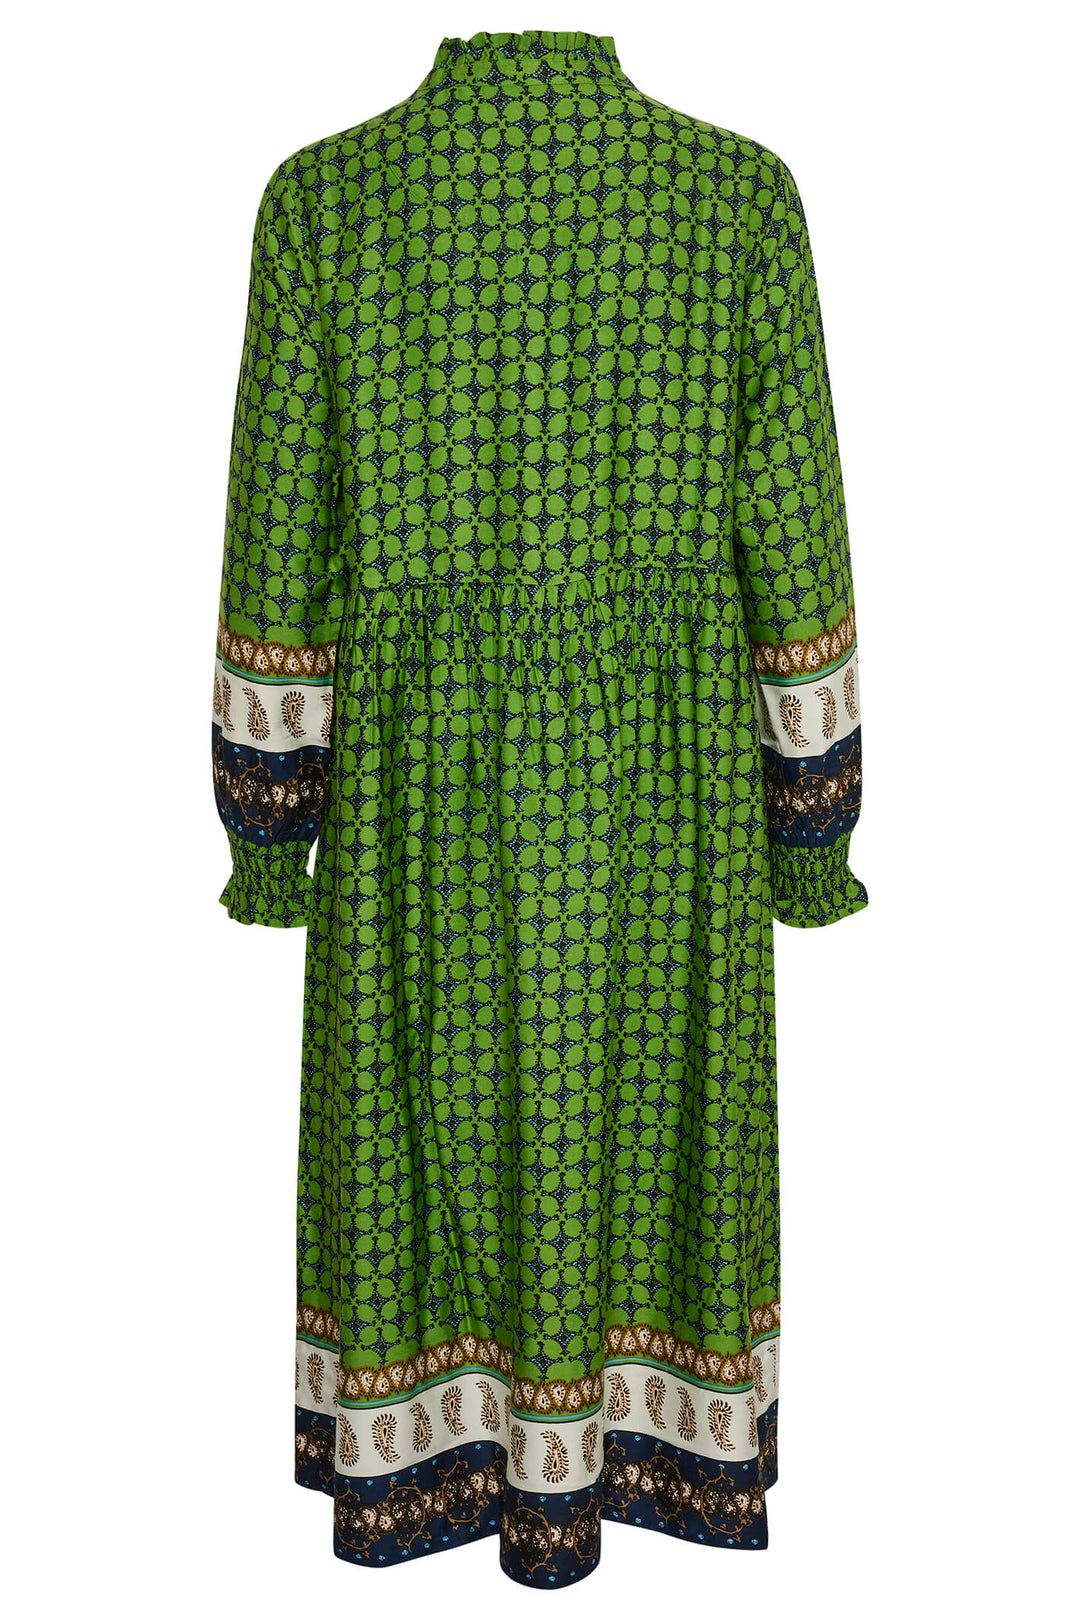 Cream Clothing CRMarlene Flourite Green Printed Dress - Experience Boutique